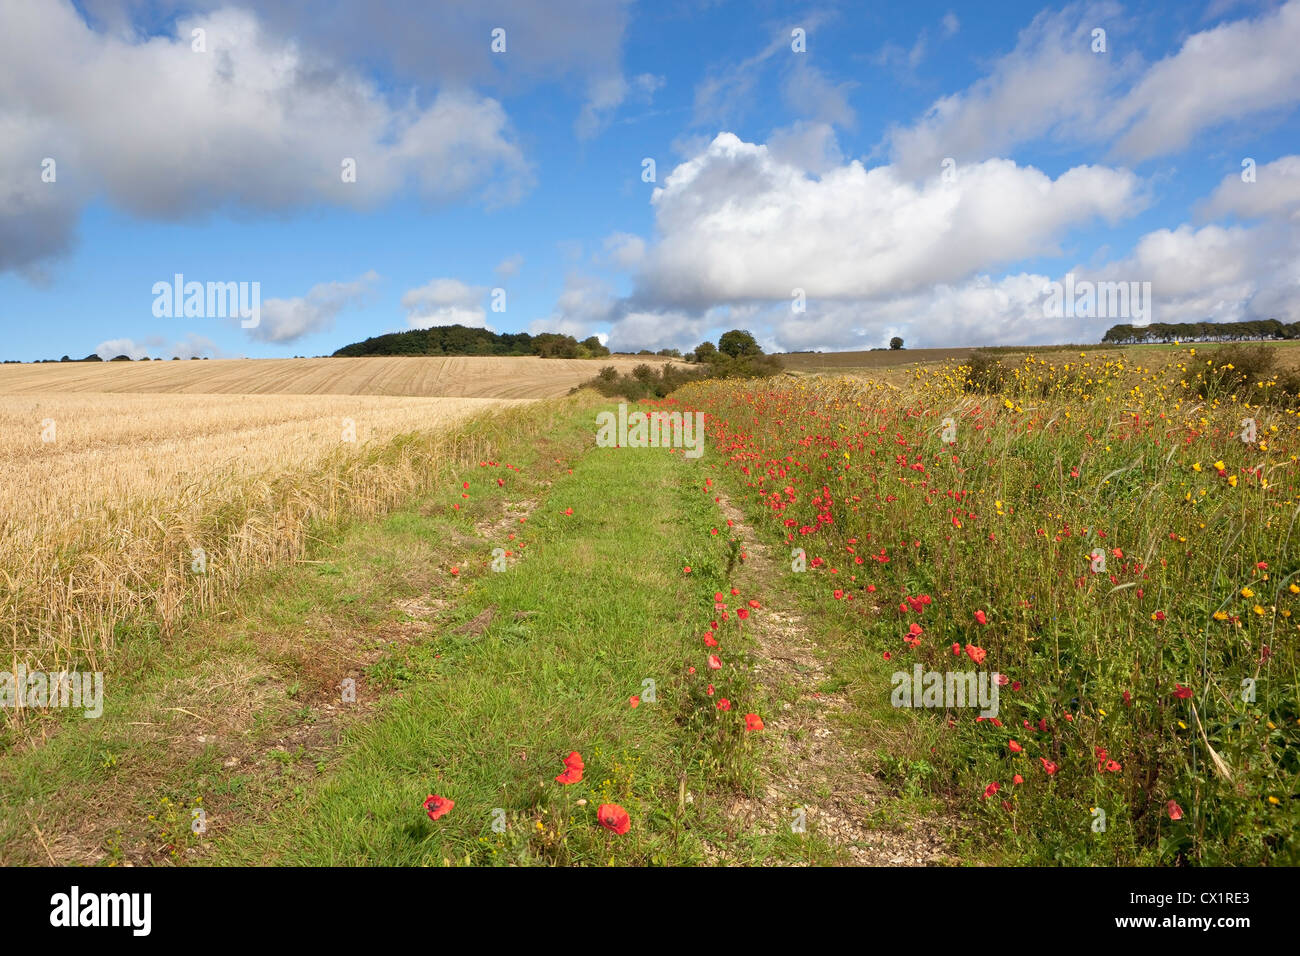 A summer landscape with a grassy track between a wheat field and a conservation strip of poppies and other wildflowers Stock Photo